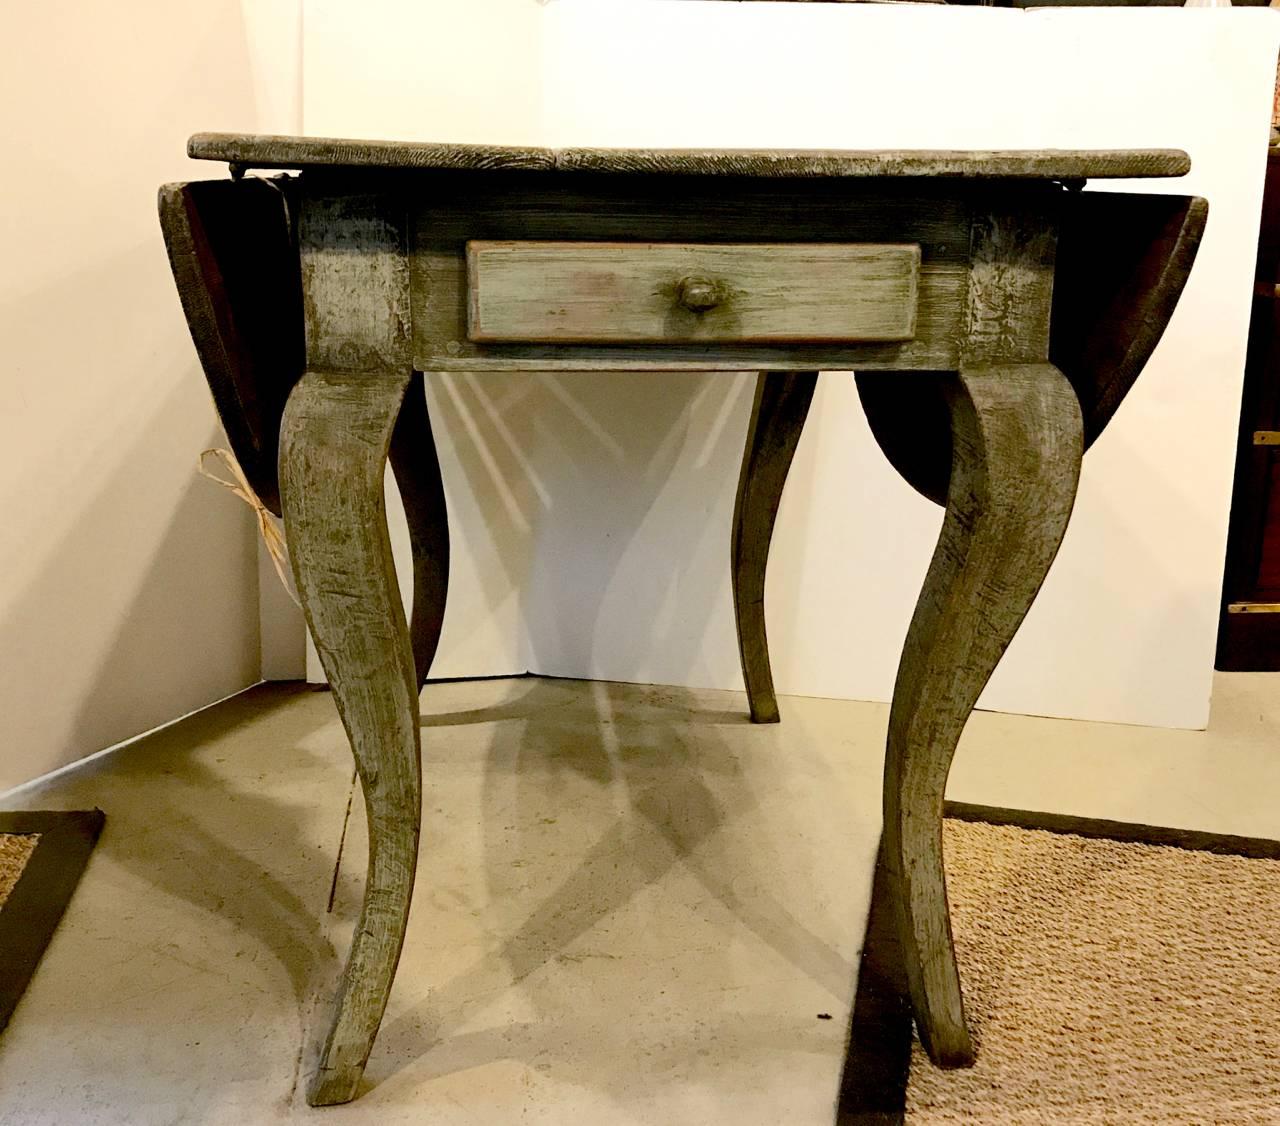 This is a wonderful 18th century drop-leaf table. All elements except the painted surface appear to be original. The curvy sexy Baroque legs and the old forged iron hinges give this table lots of character. With the drop sides up, the table is a